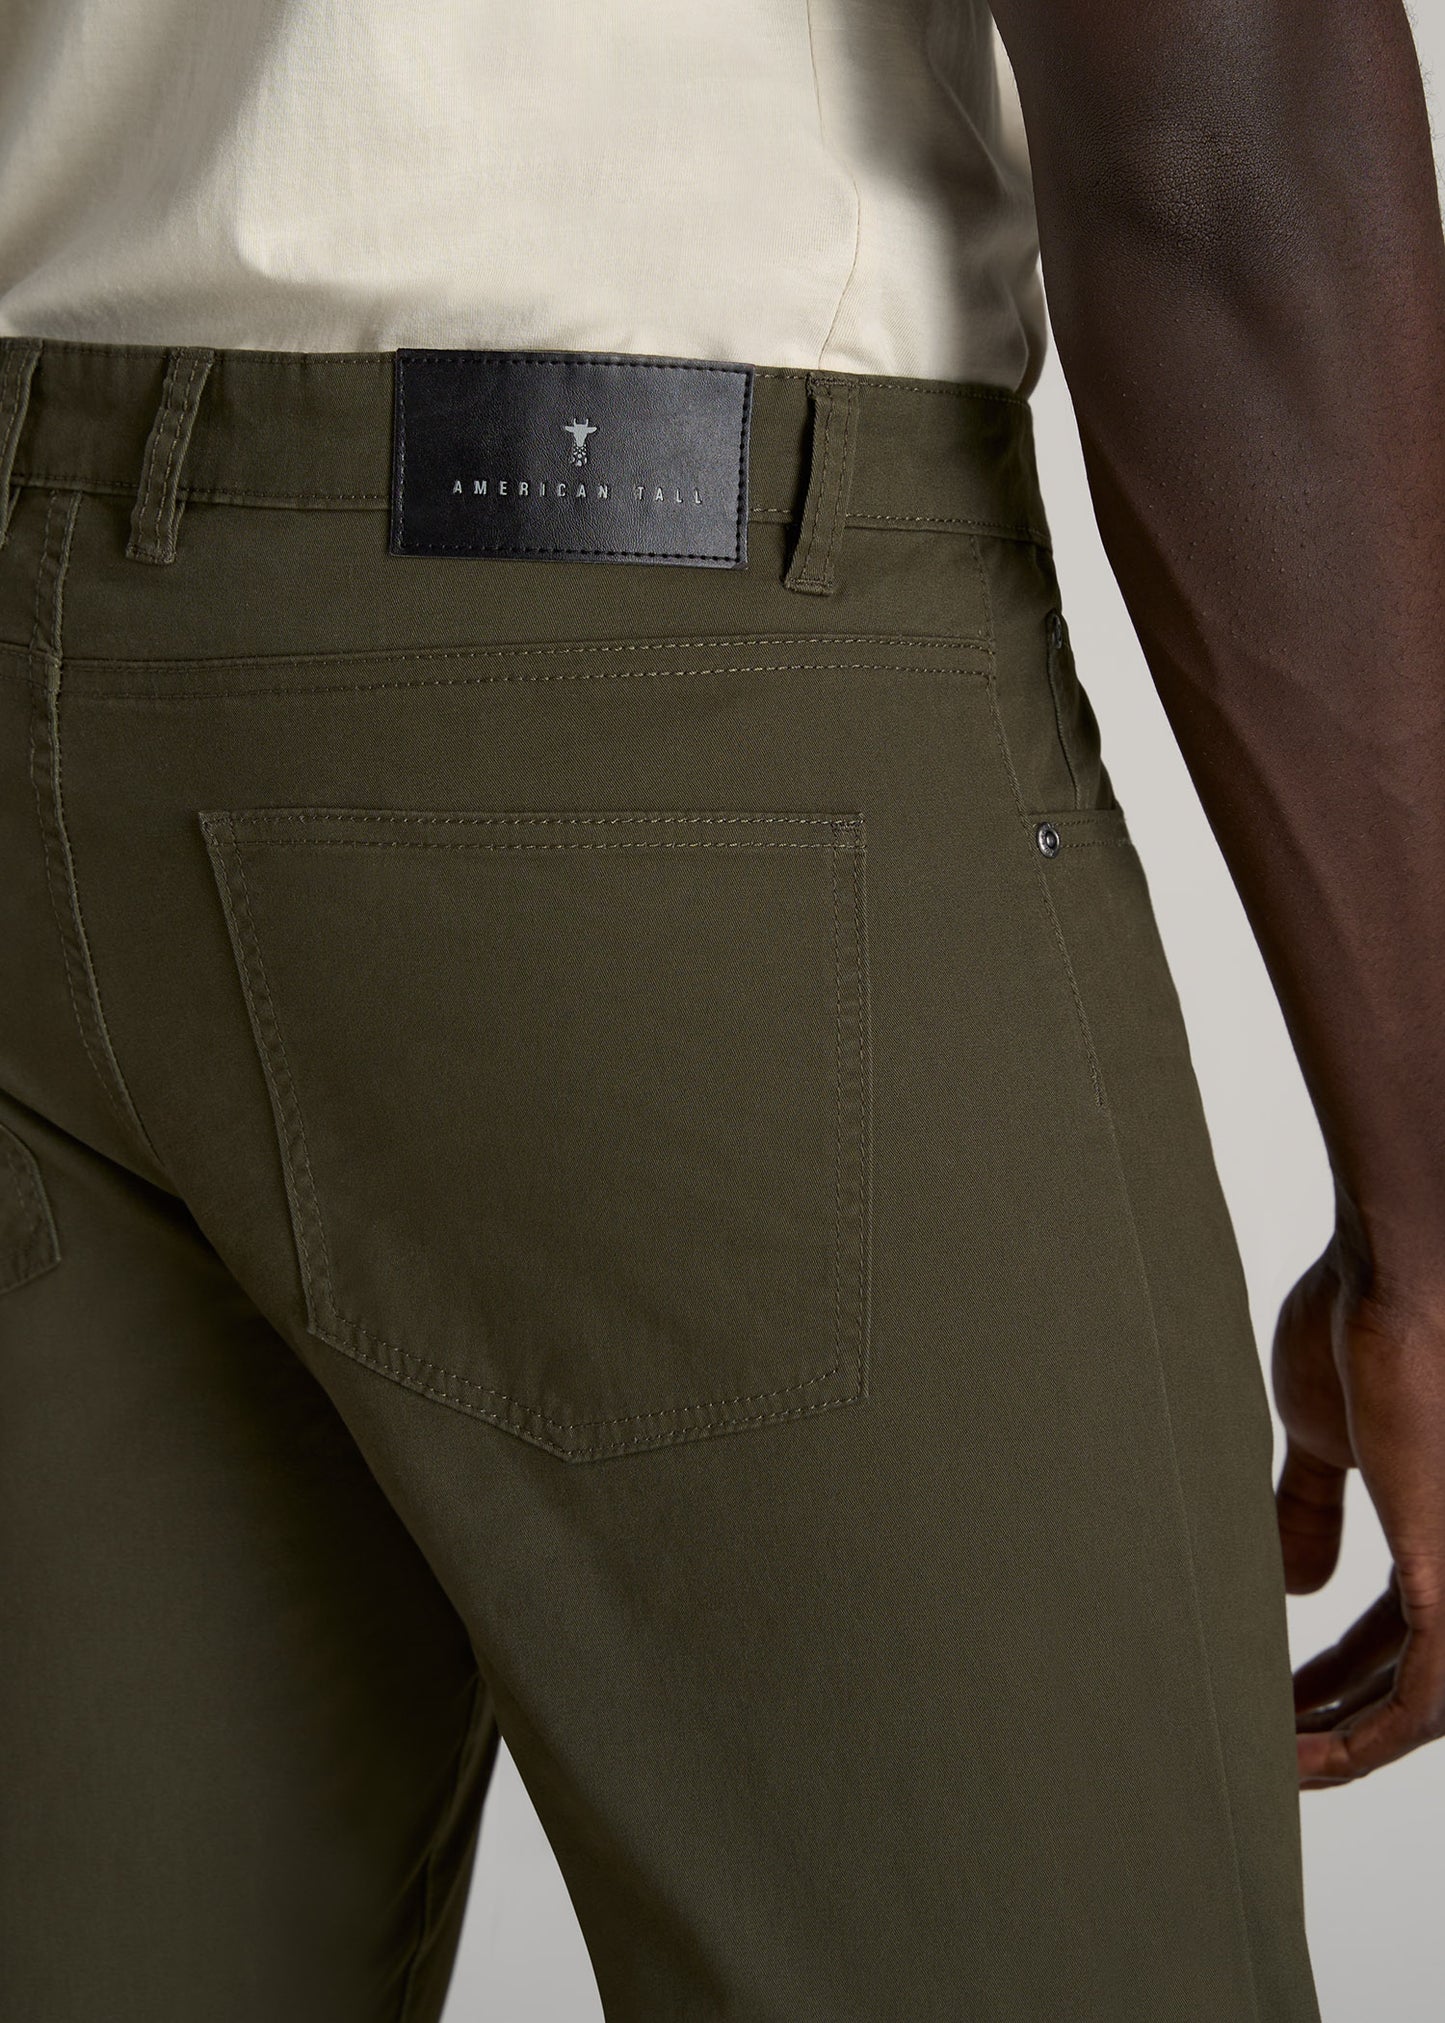 Carman TAPERED Fit Five Pocket Pants for Tall Men in Camo Green